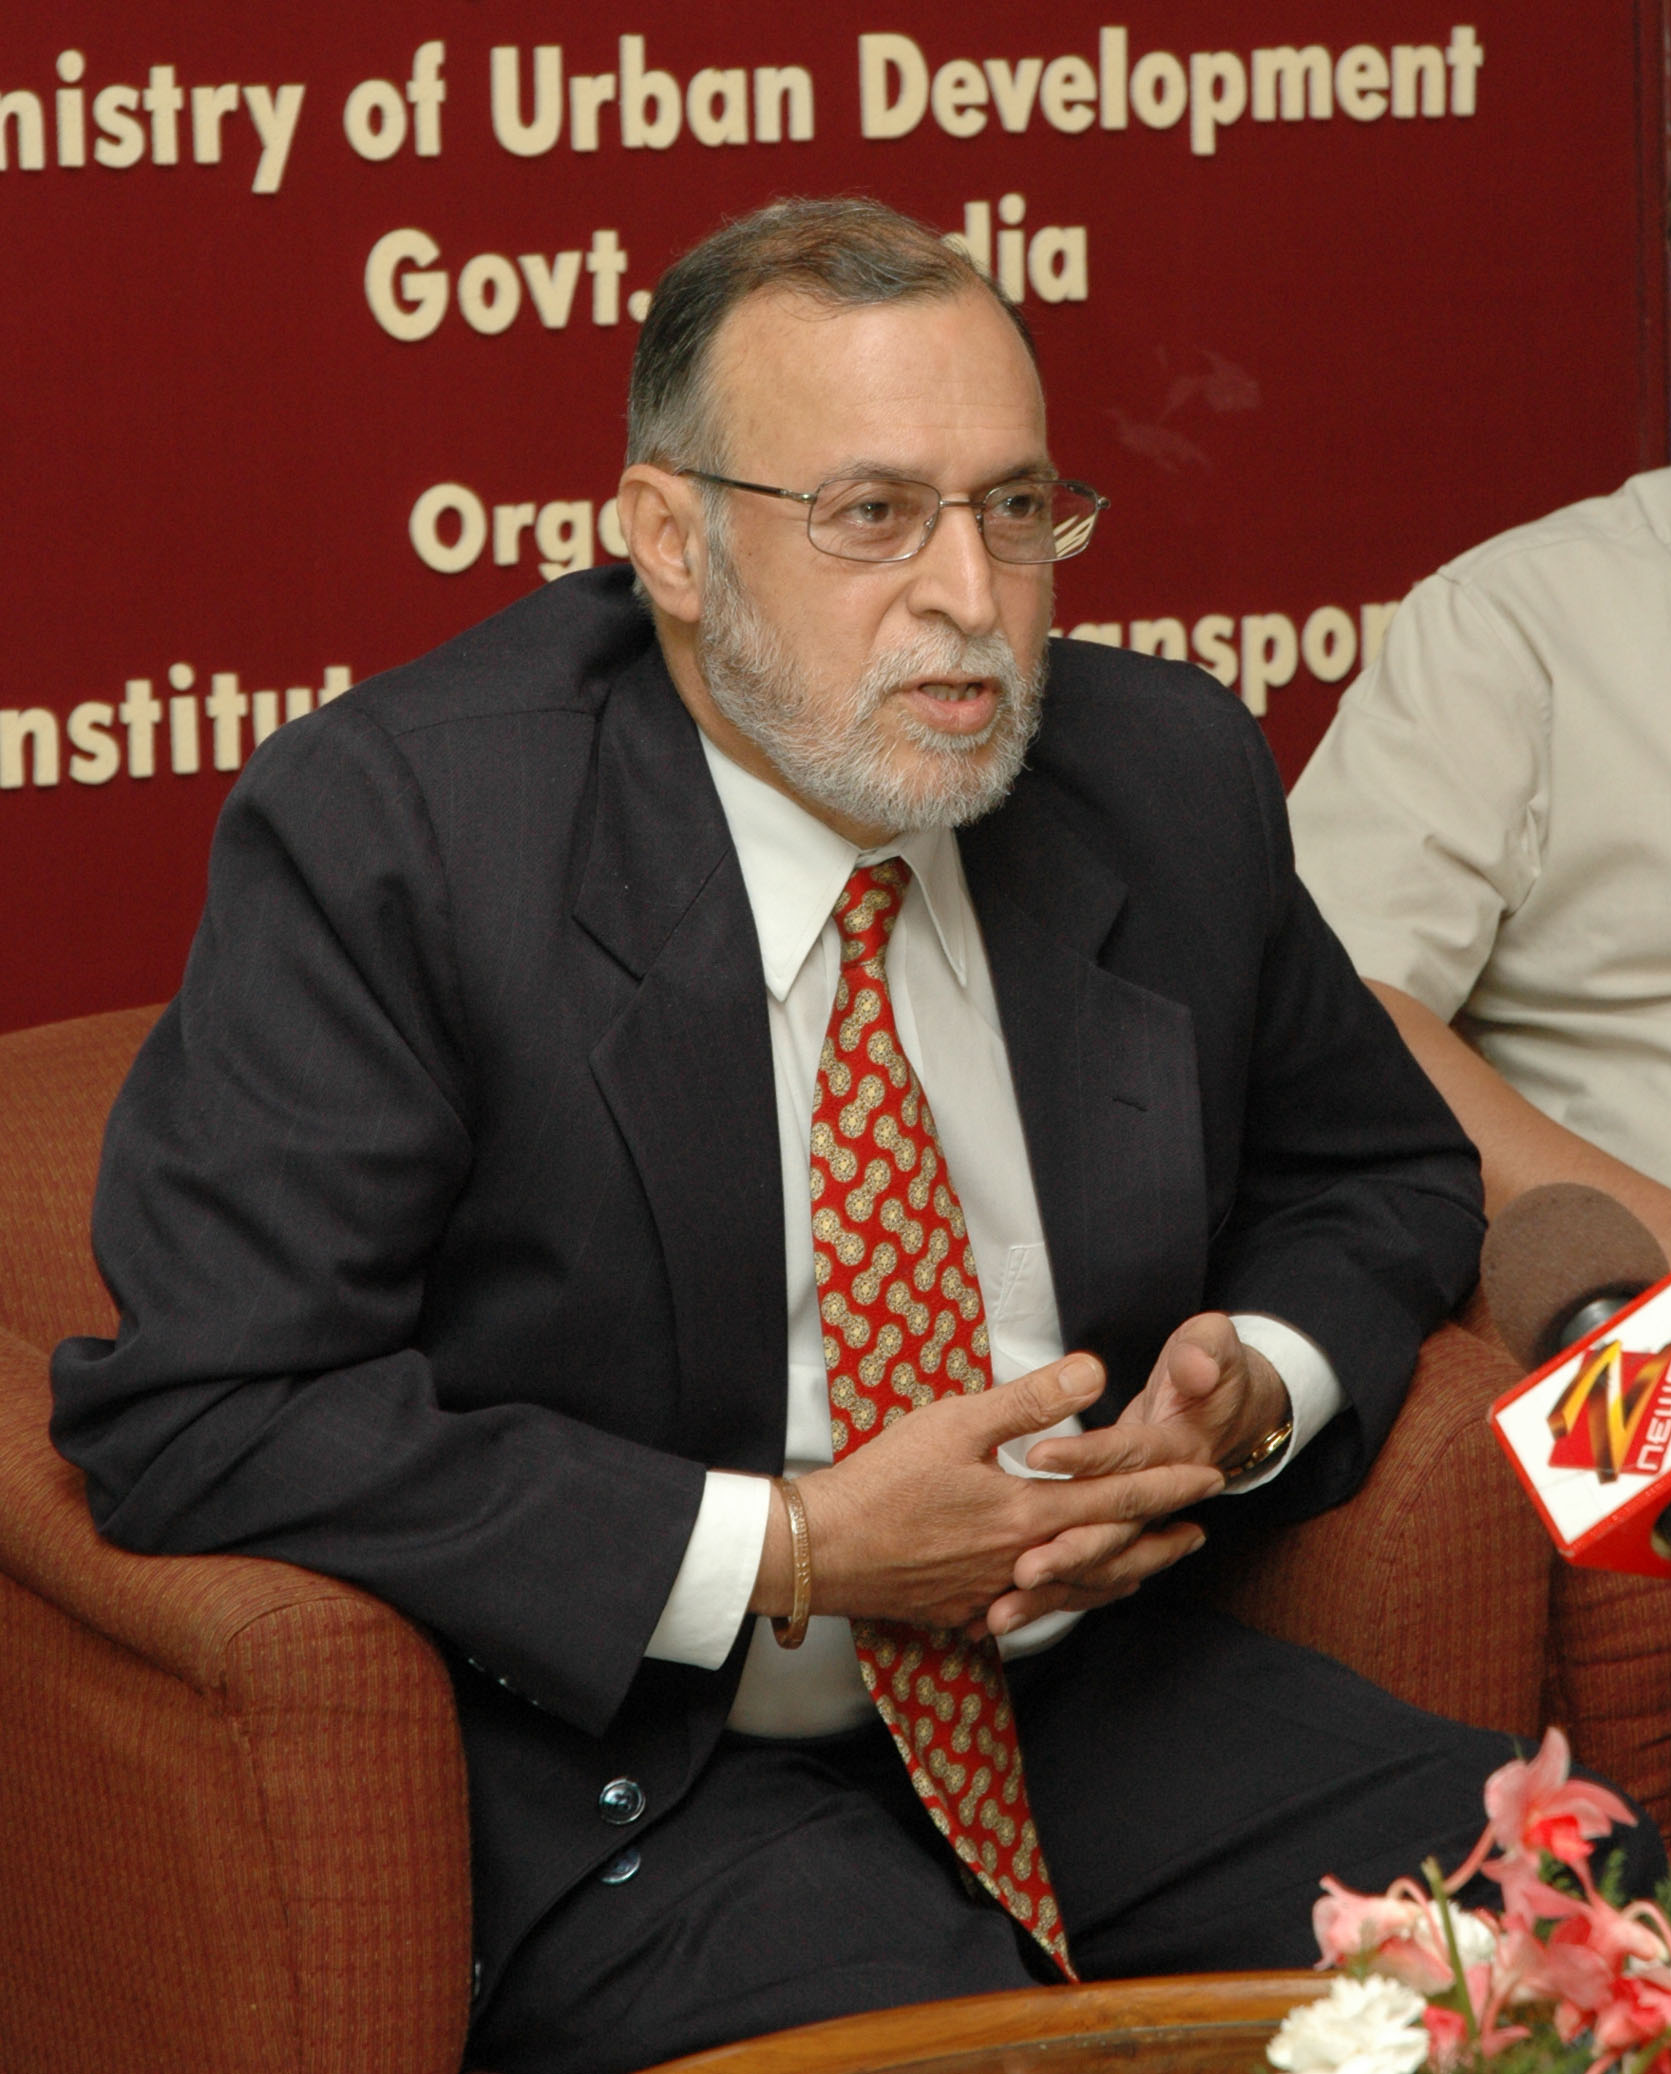 The city belongs to you, says Delhi Lt Gov Baijal to fleeing migrant workers